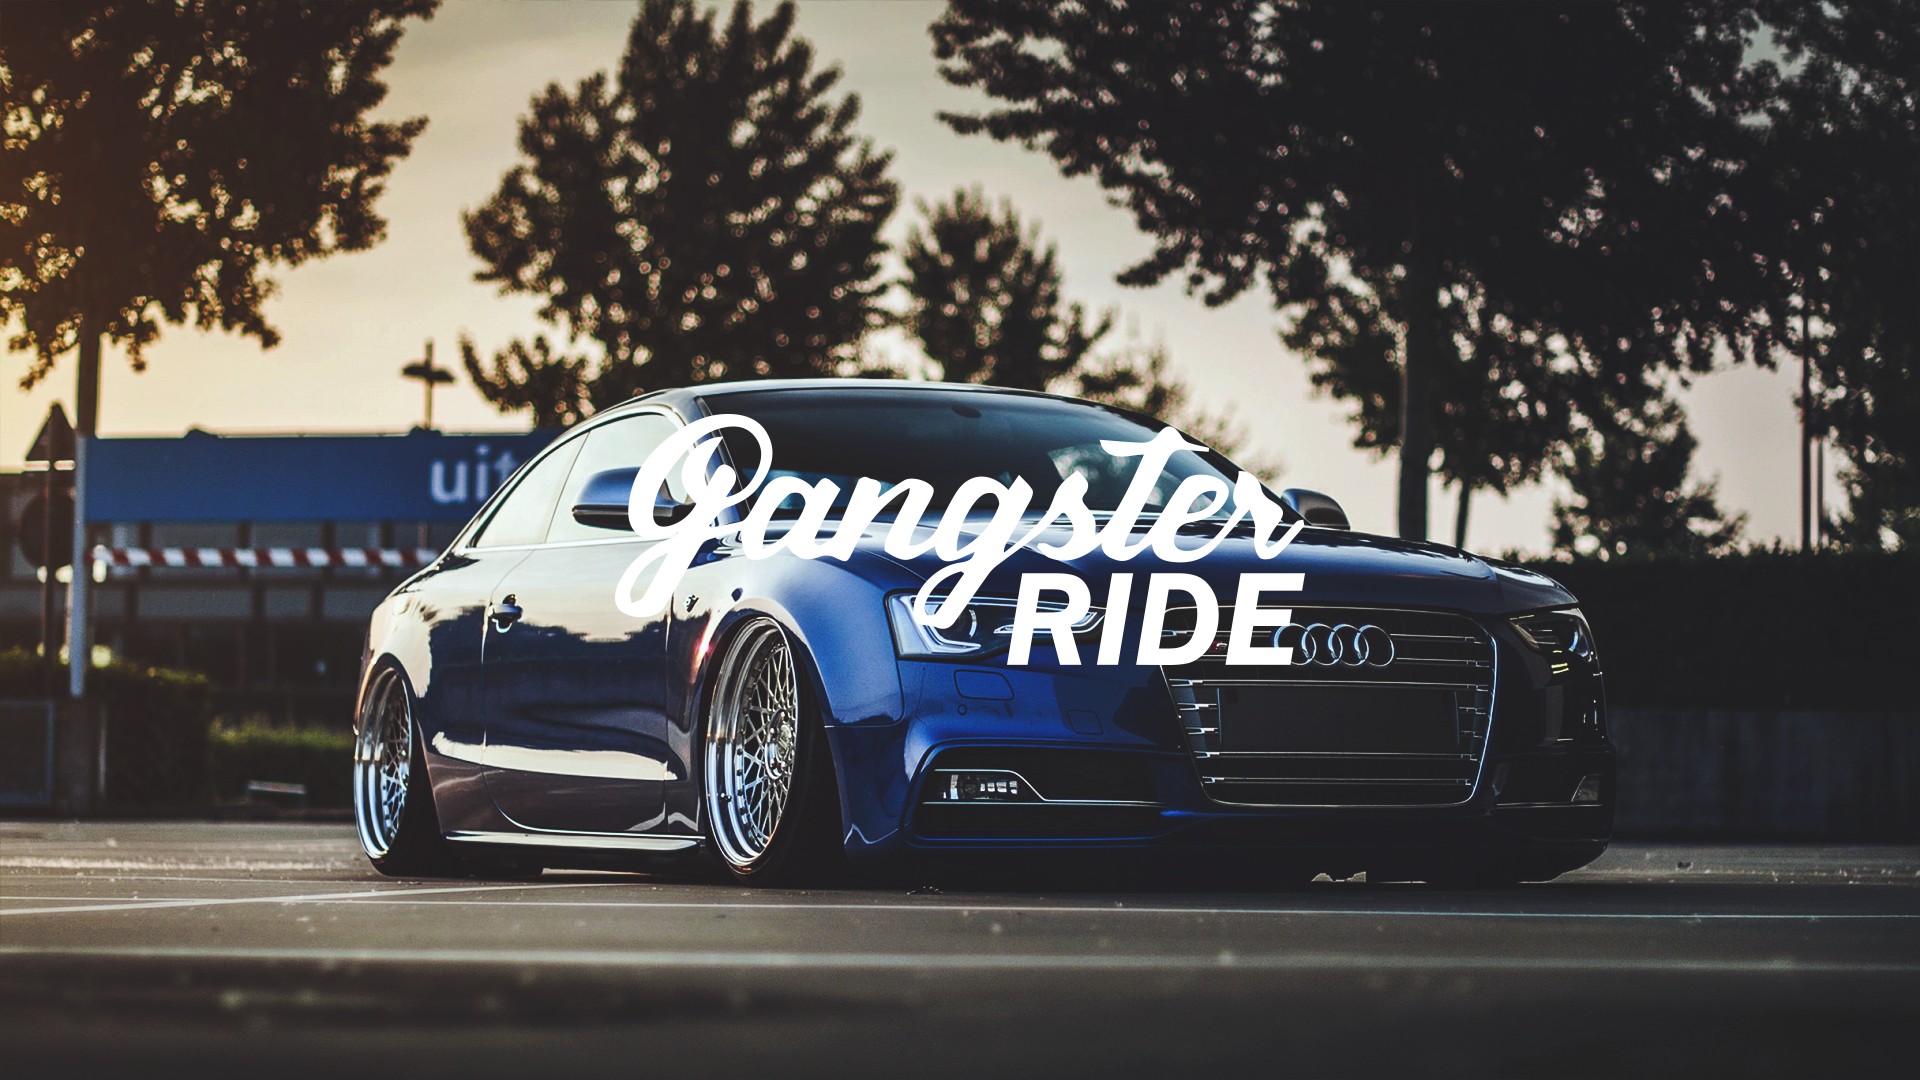 GANGSTER RIDE, Car, Tuning, Lowrider, Audi, Colorful, Stanced Wallpaper